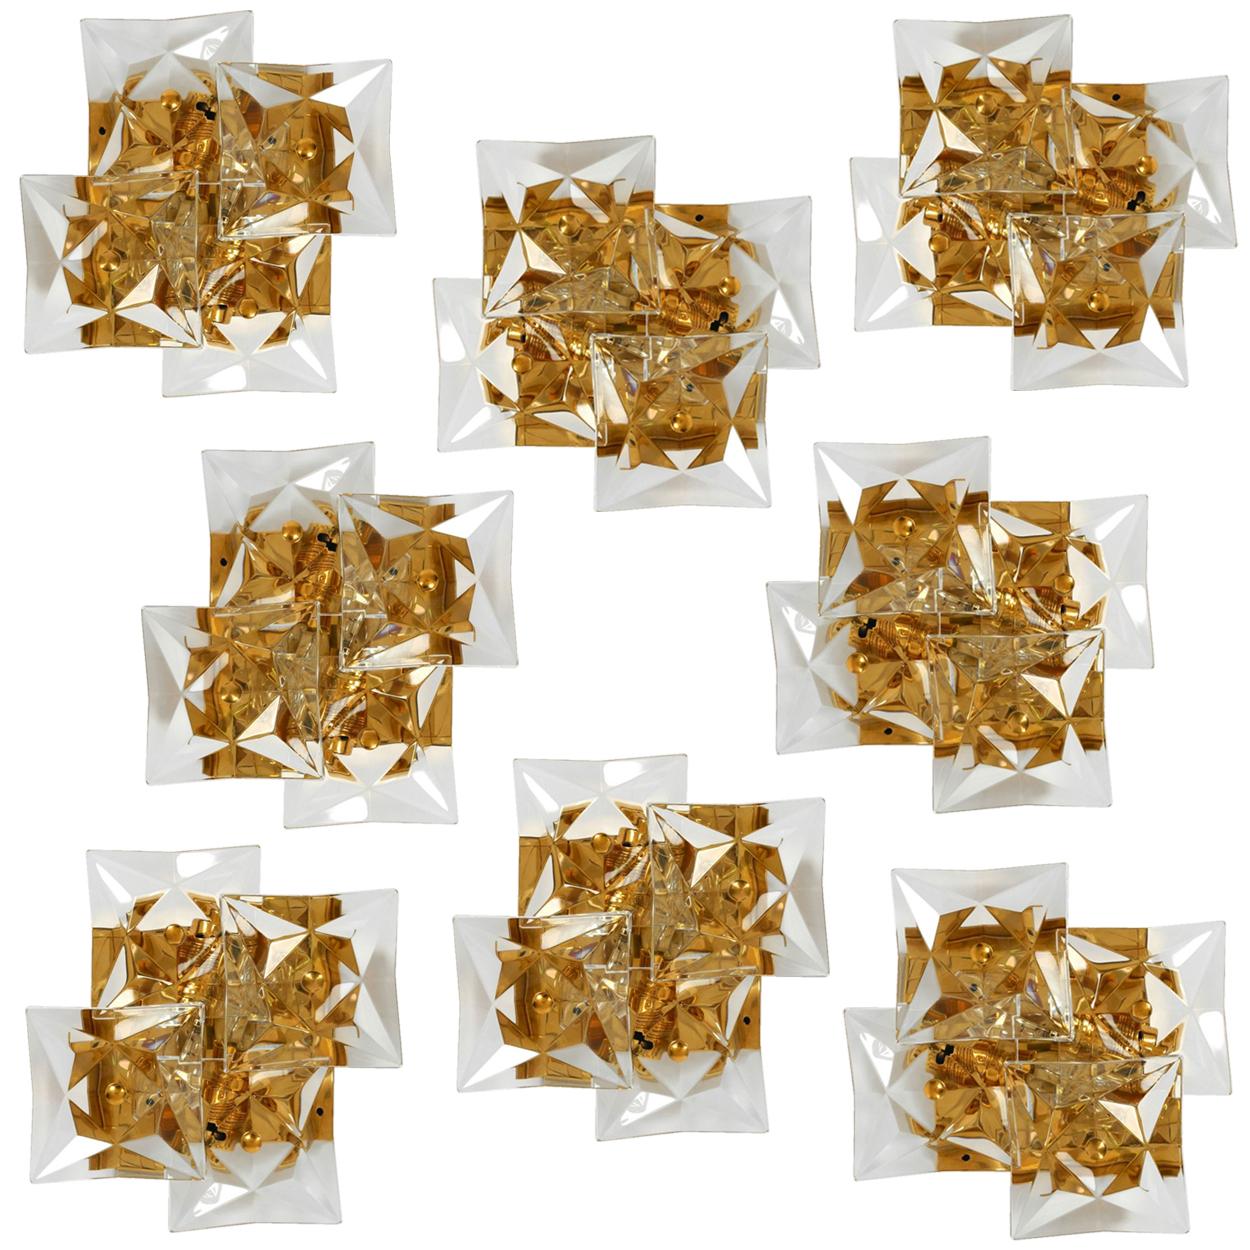 One of the Ten Square Crystal, Gold-Plated, Sconces by Kinkeldey, Germany, 1970s For Sale 3